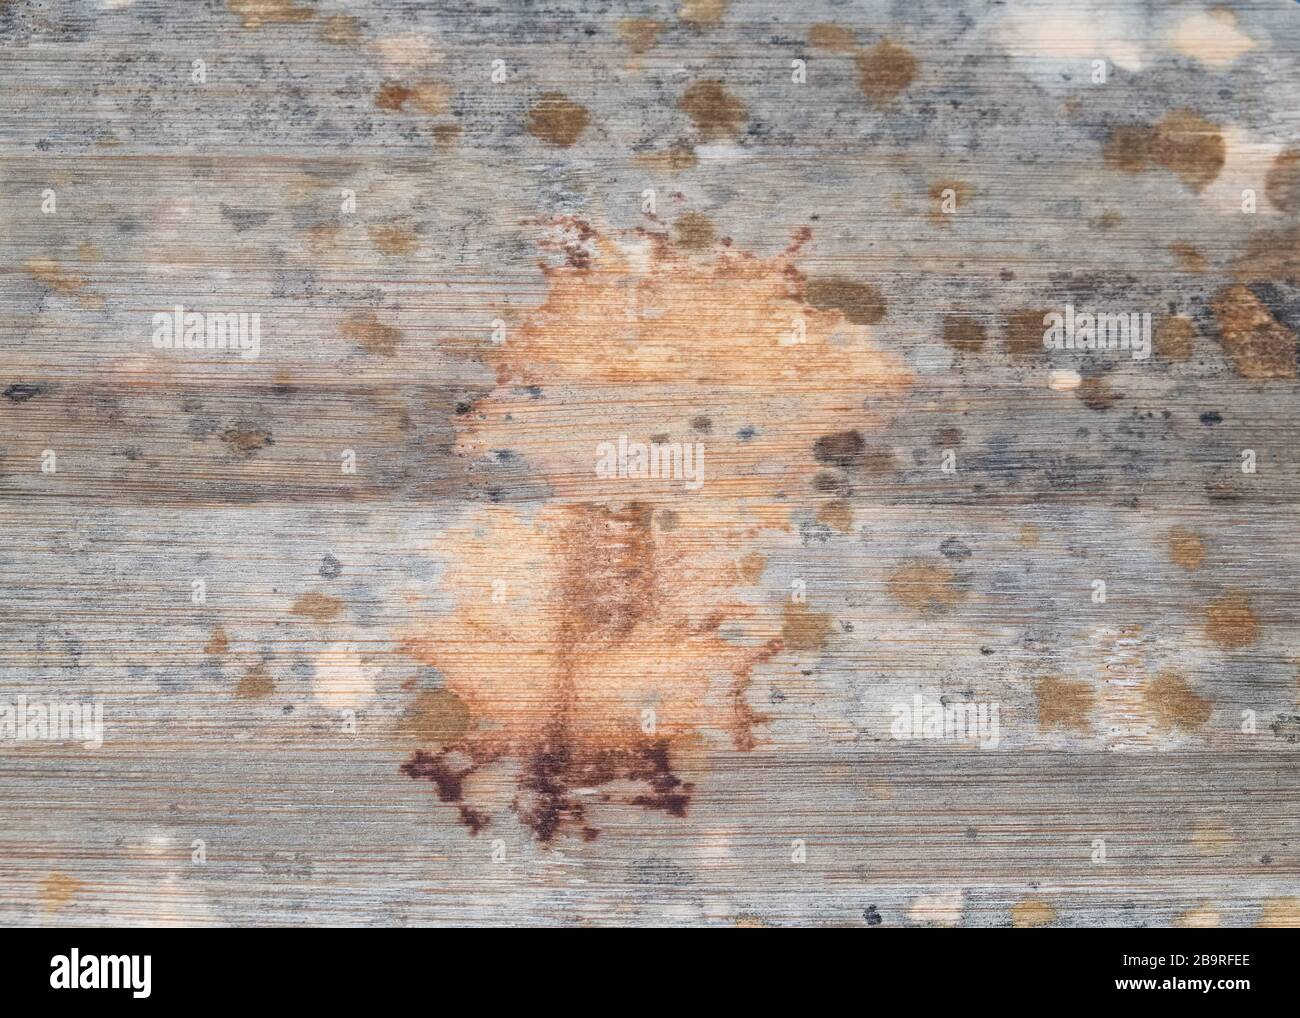 Concept of disease, a wooden board with many spots that show the development of a disease or a virus. Stock Photo